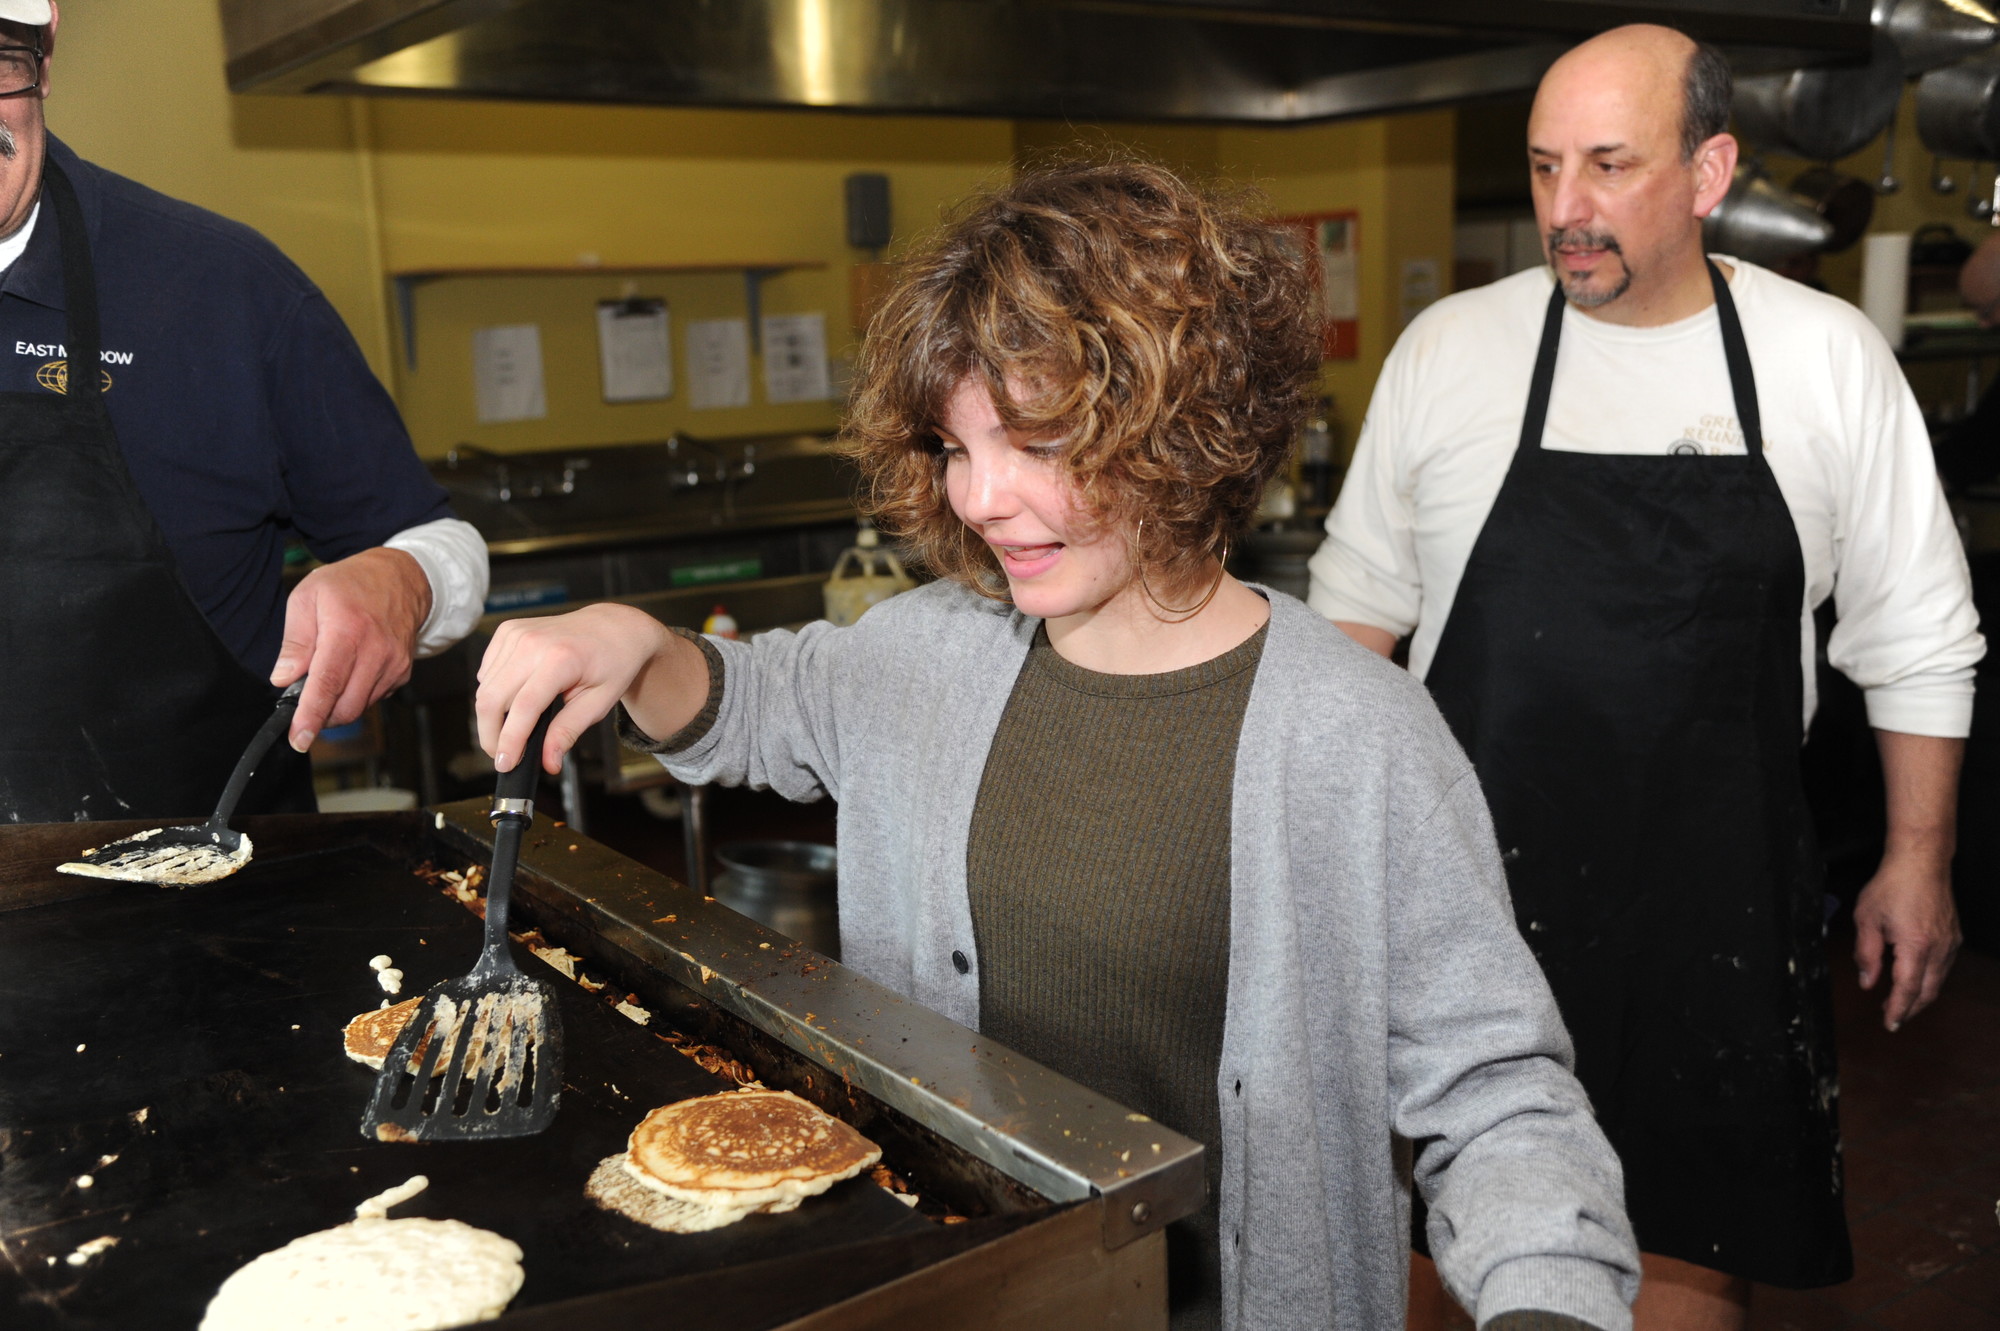 “Gotham” actress Camren Bocondova tried her hand at flipping pancakes at the annual East Meadow Kiwanis all-you-can-eat breakfast.